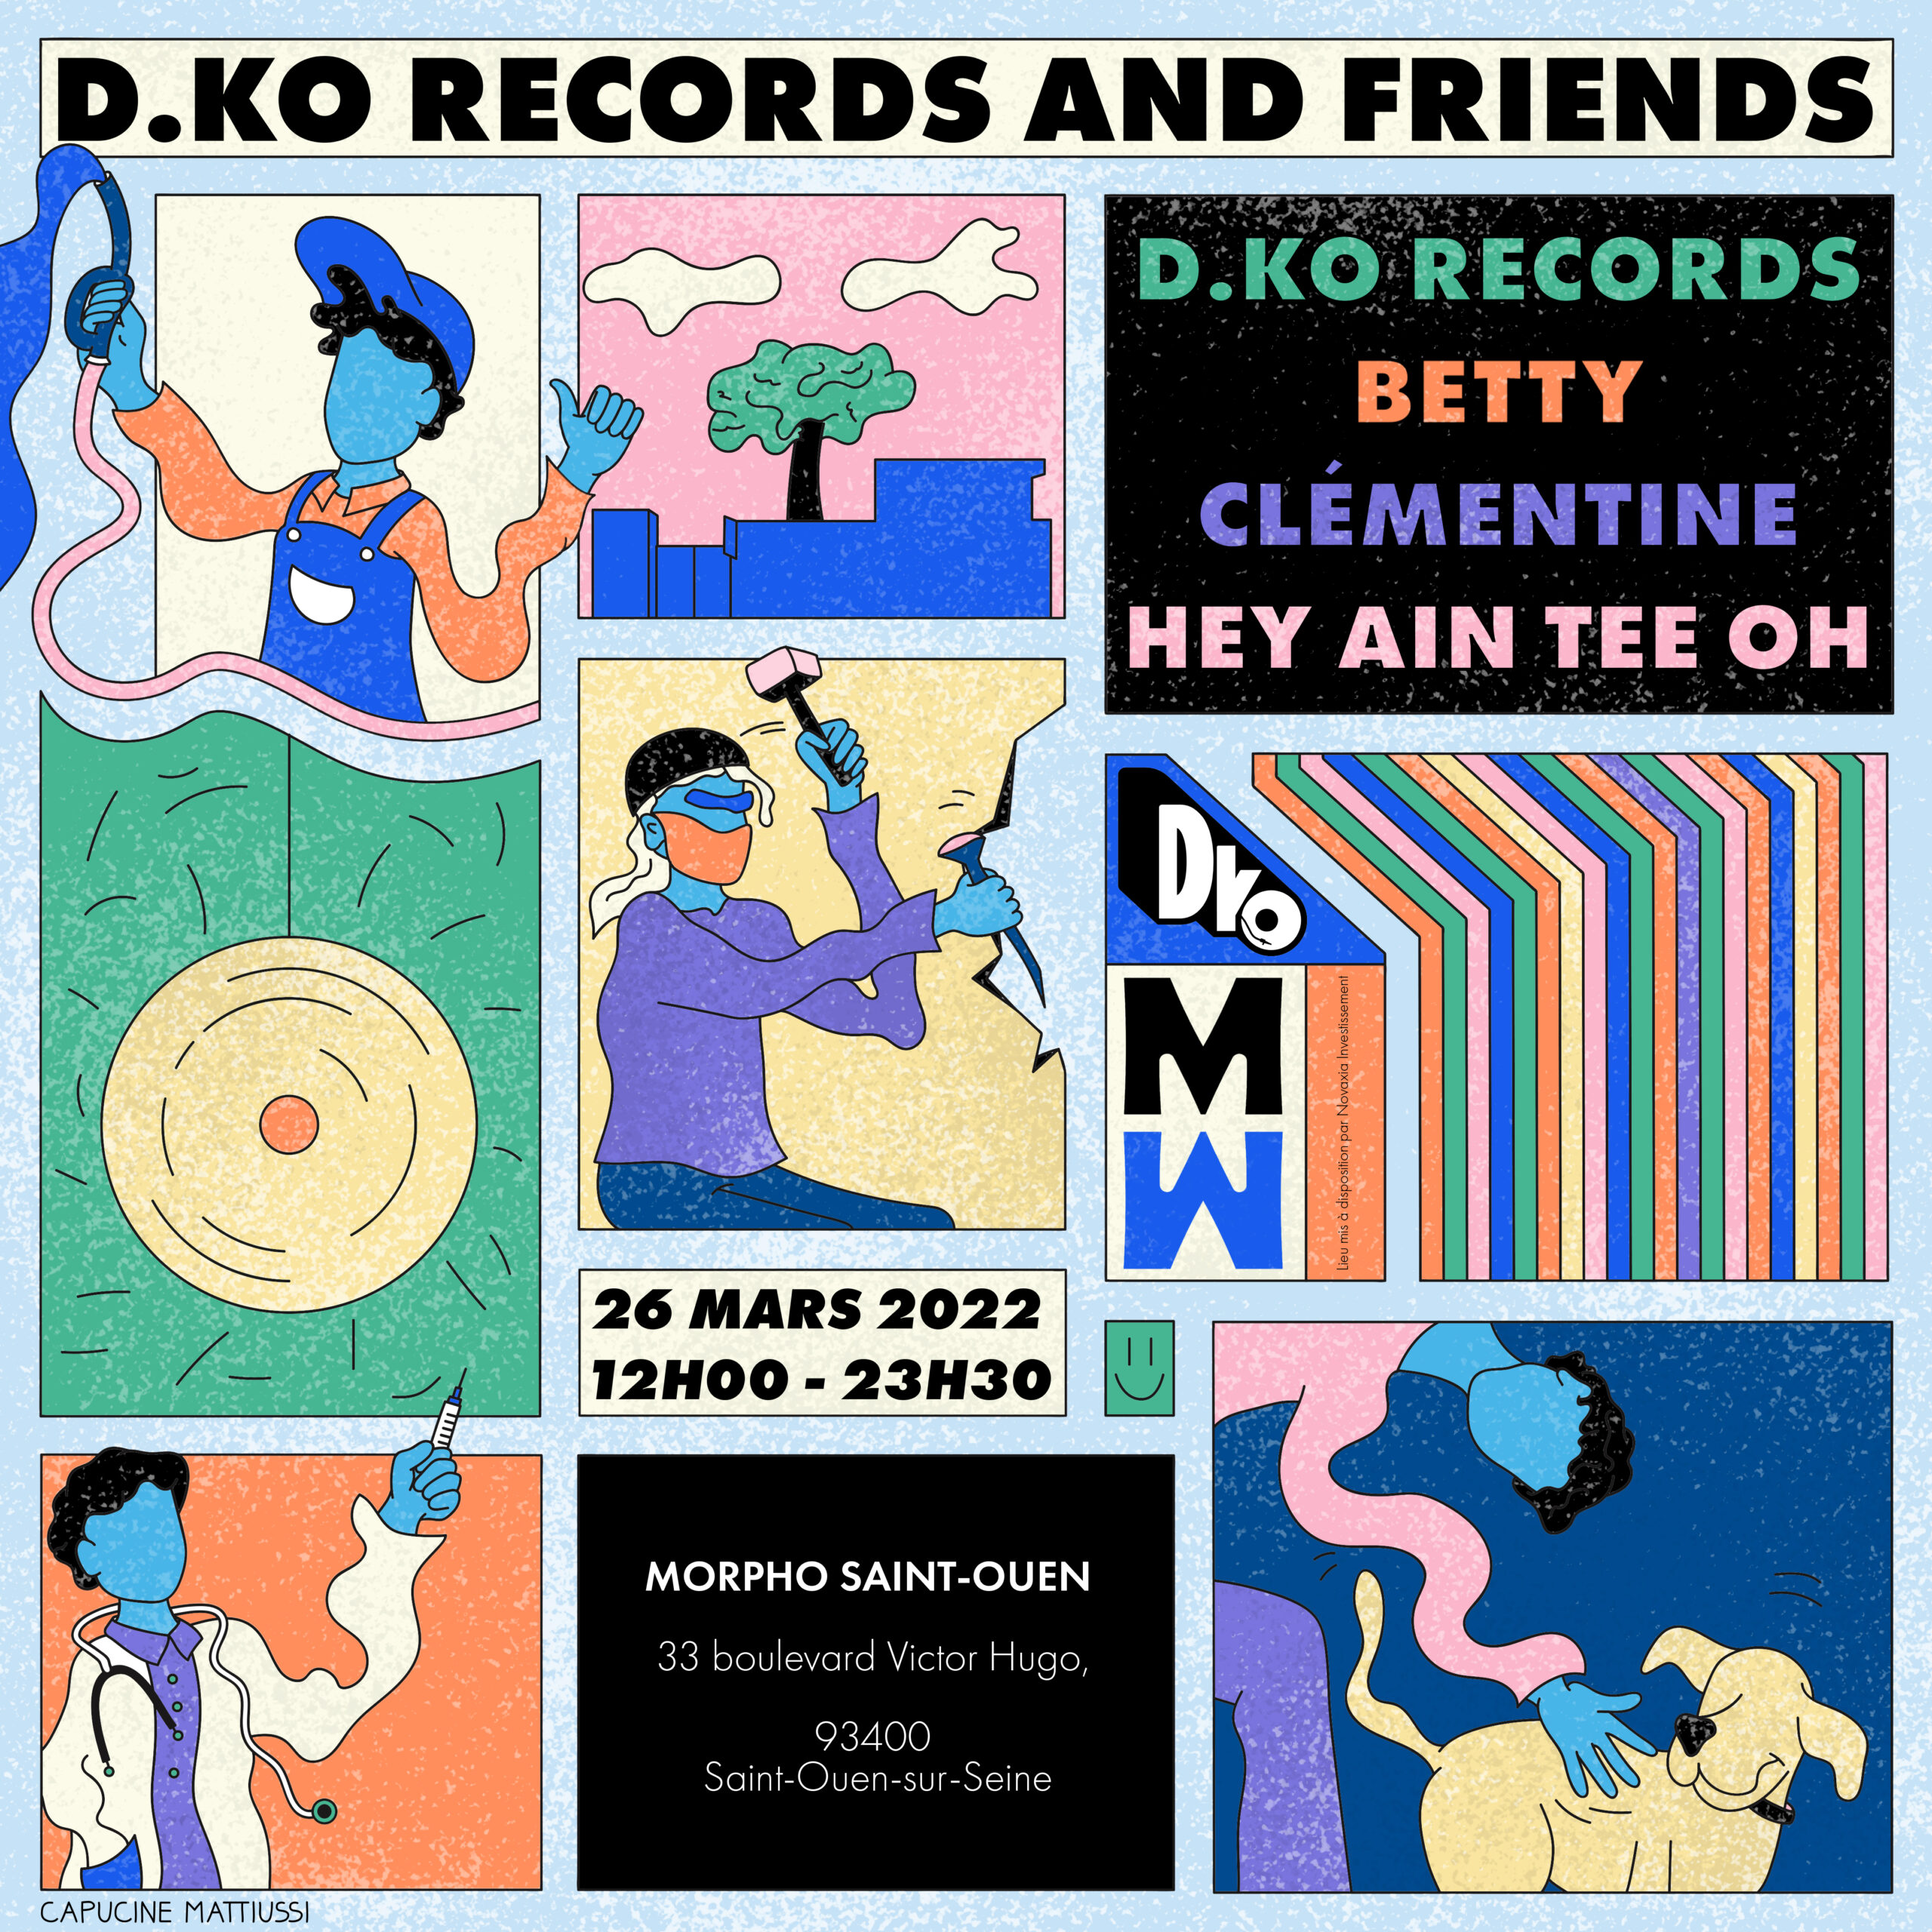 D.KO RECORDS AND FRIENDS